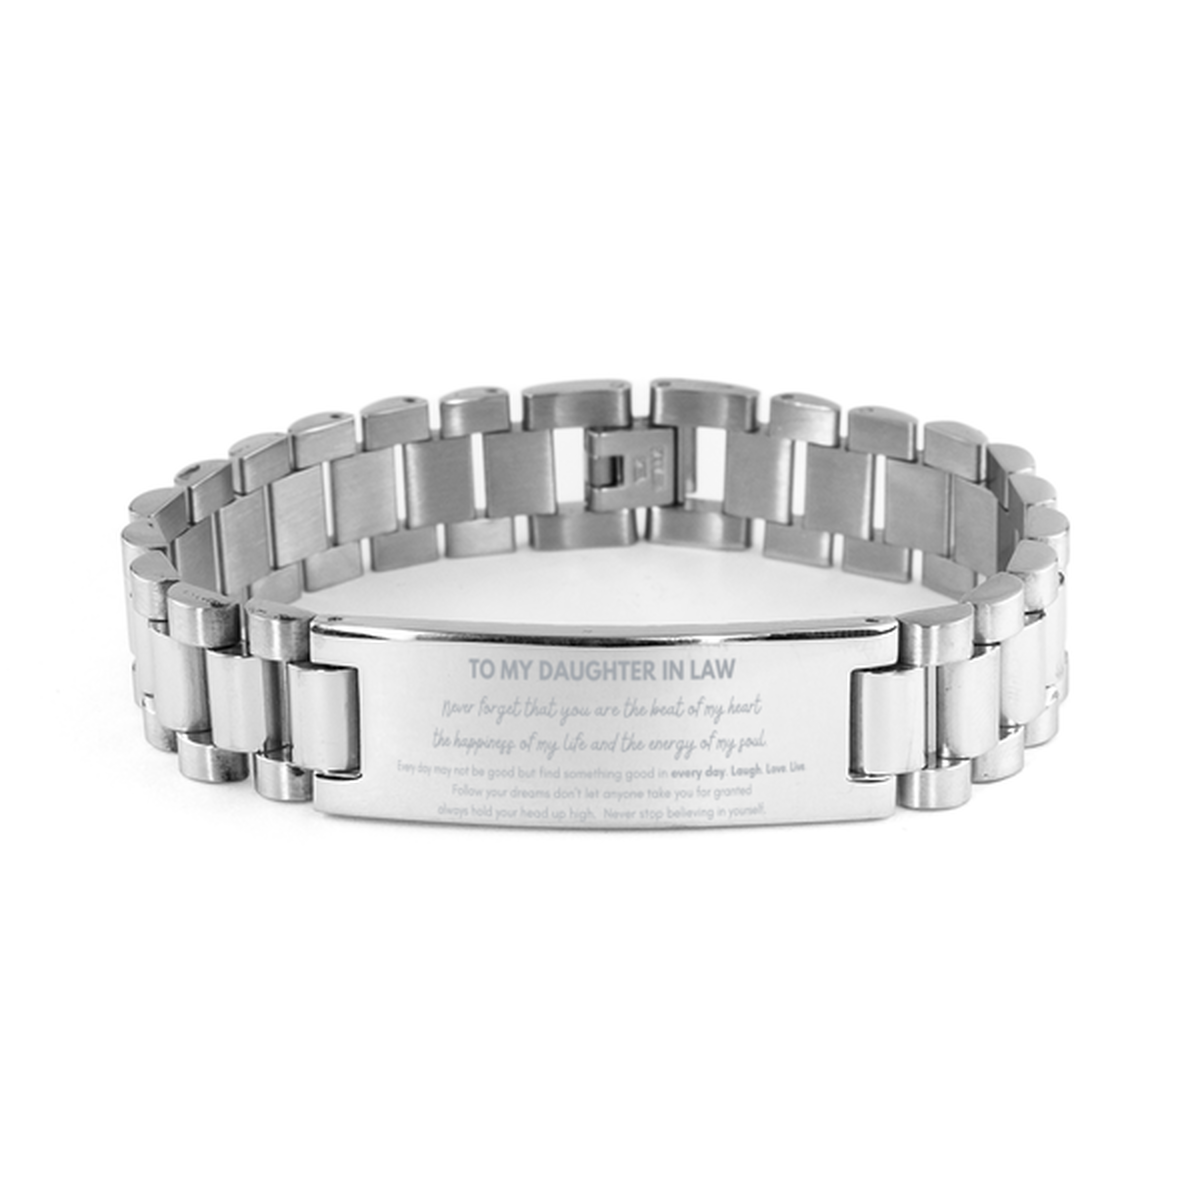 To My Daughter In Law Bracelet Gifts, Christmas Daughter In Law Ladder Stainless Steel Bracelet Present, Birthday Unique Motivational For Daughter In Law, To My Daughter In Law Never forget that you are the beat of my heart the happiness of my life and th